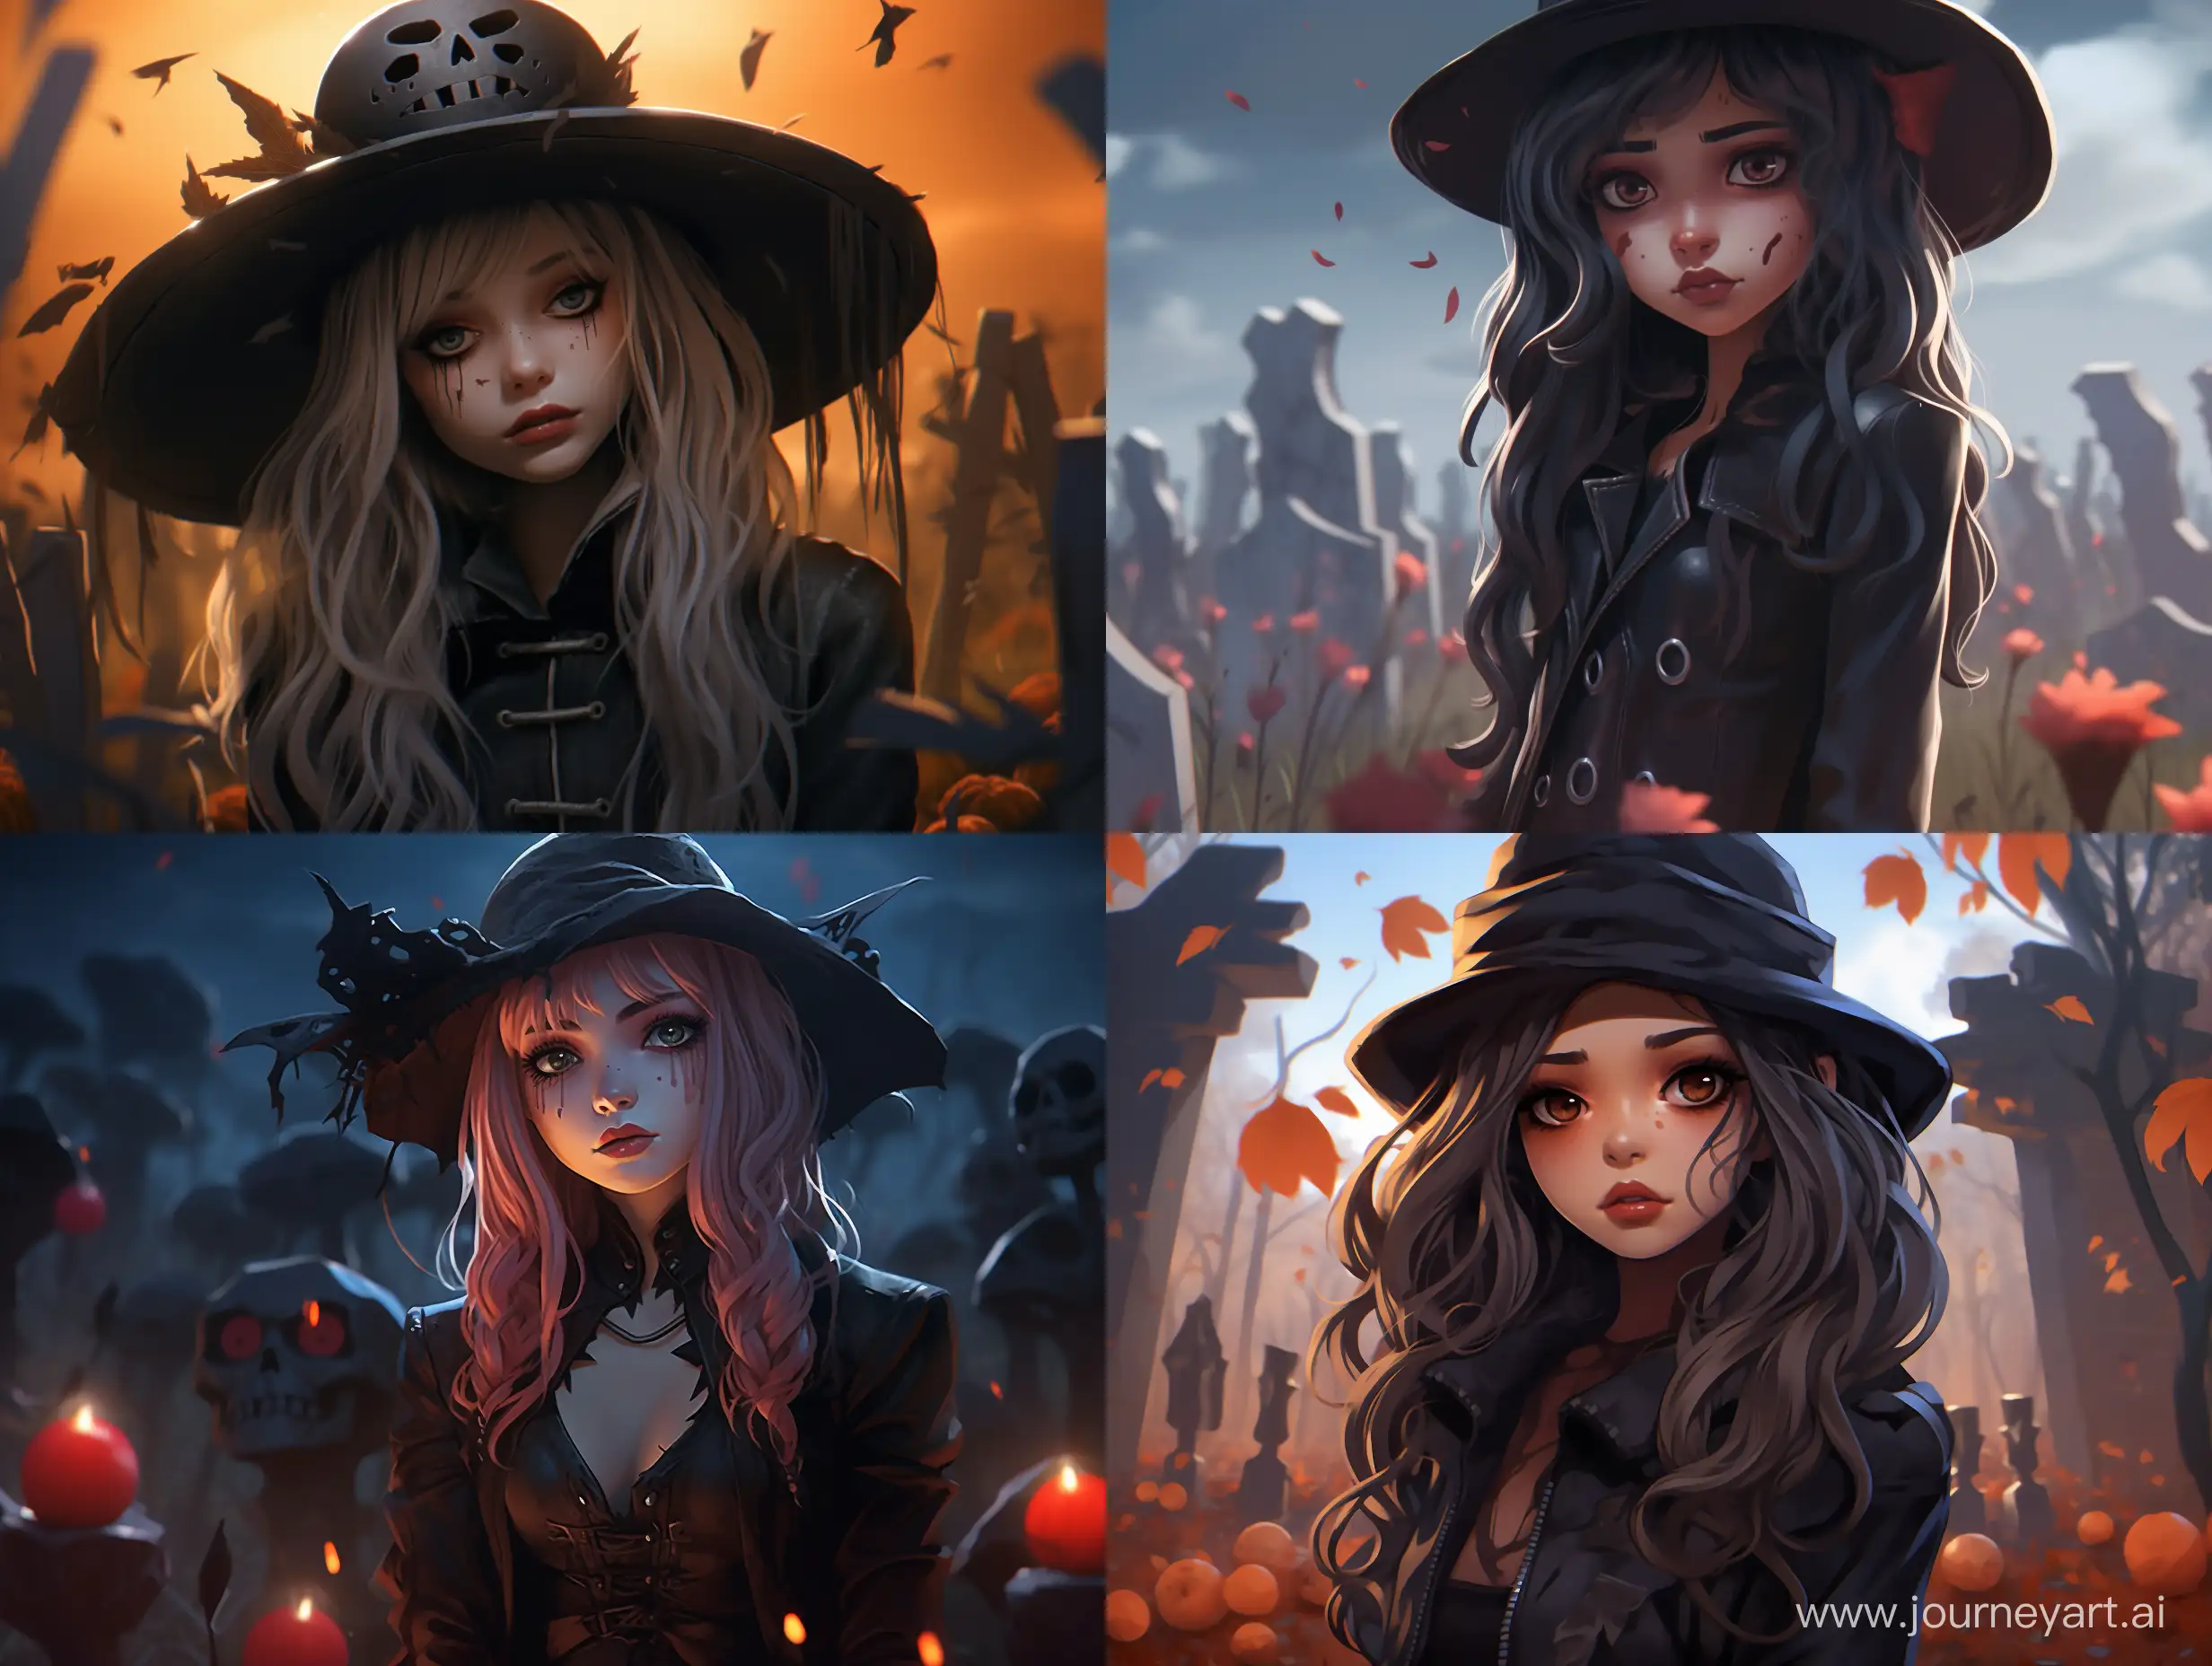 Cute-Realistic-Anime-Witch-Girl-with-a-Sad-Face-in-a-Graveyard